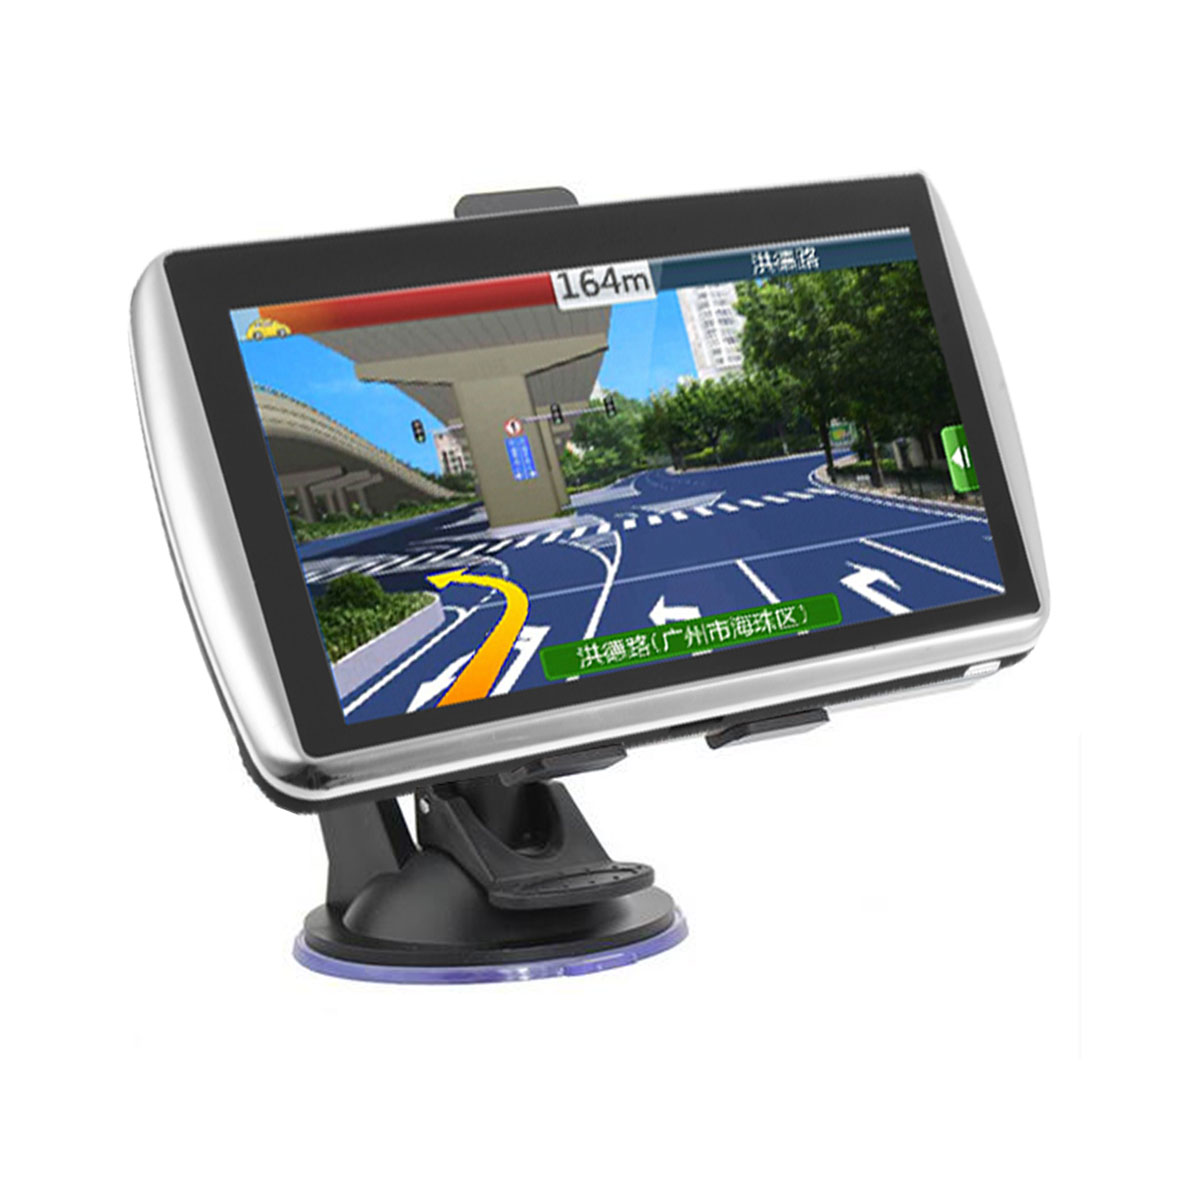 

7 Inch Car GPS Navigation Sat Nav TFT LCD Touch Screen Support North America Europe Map